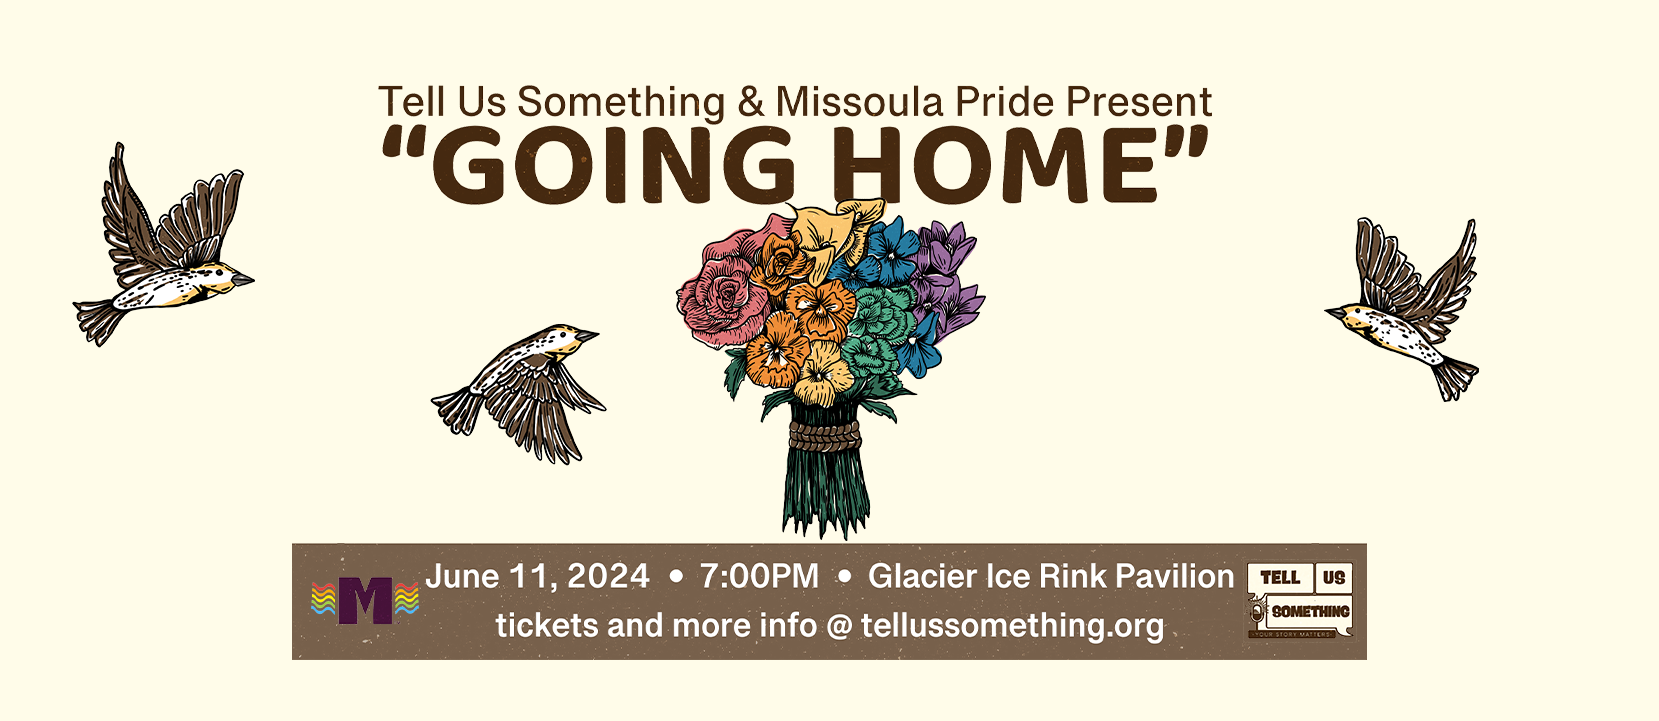 The image is a poster featuring meadowlarks and flowers along with text promoting a live storytelling event on the theme "GOING HOME" presented by Tell Us Something and Missoula Pride. The event is scheduled for June 11, 2024, at 7:00 PM at the Glacier Ice Rink Pavilion. For tickets and more information, visit tellussomething.org. Artwork by Kate Radloff.